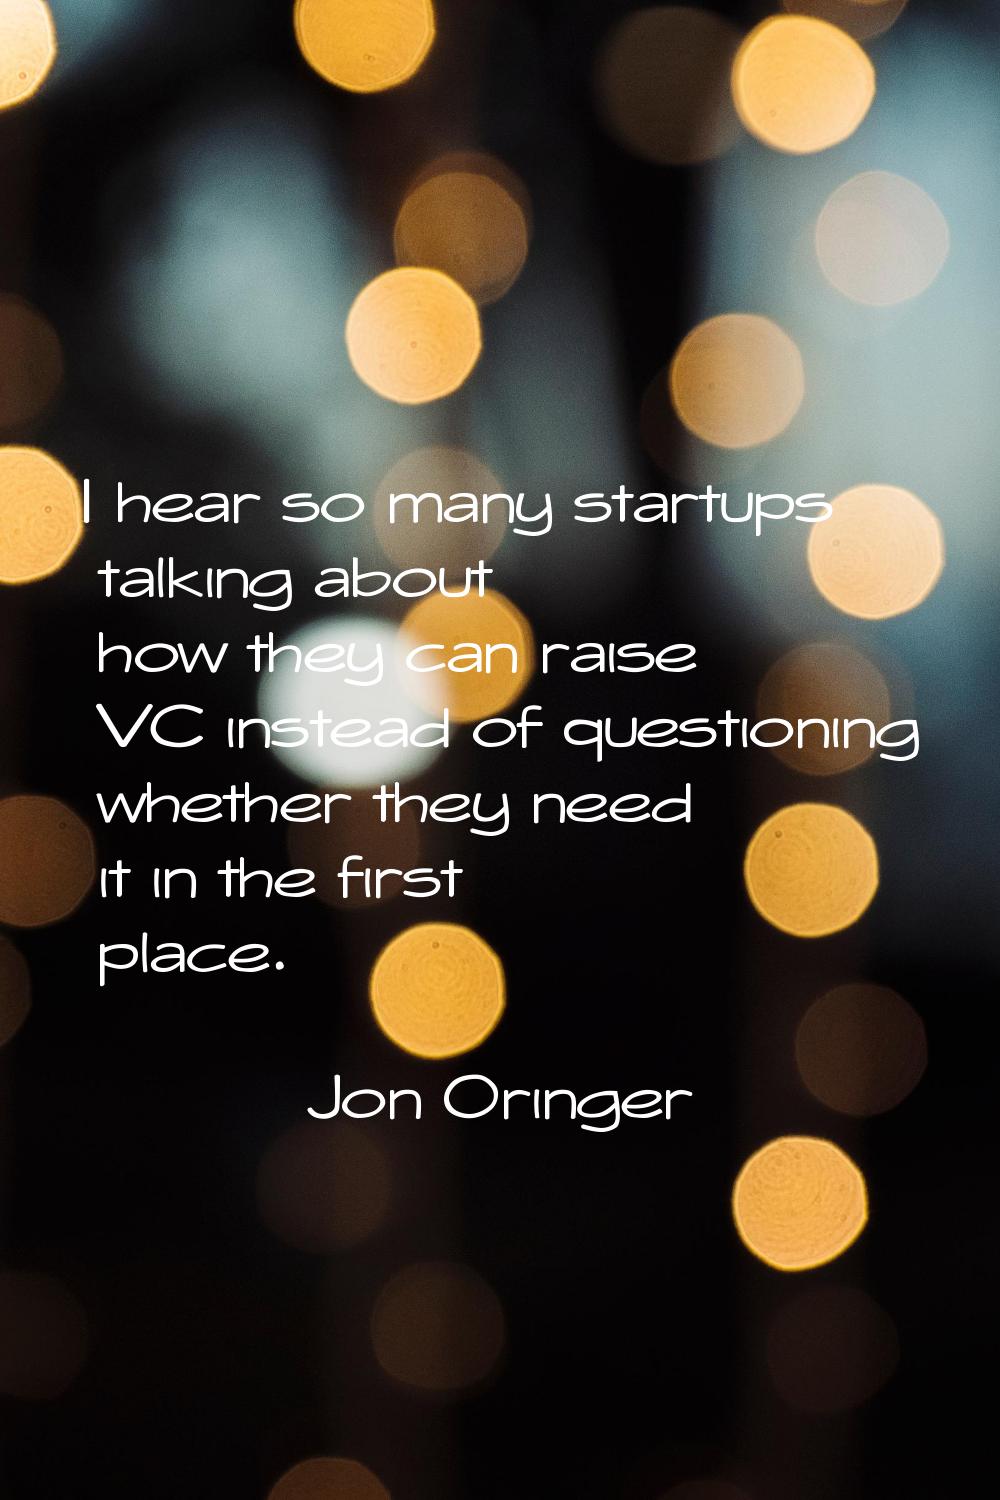 I hear so many startups talking about how they can raise VC instead of questioning whether they nee